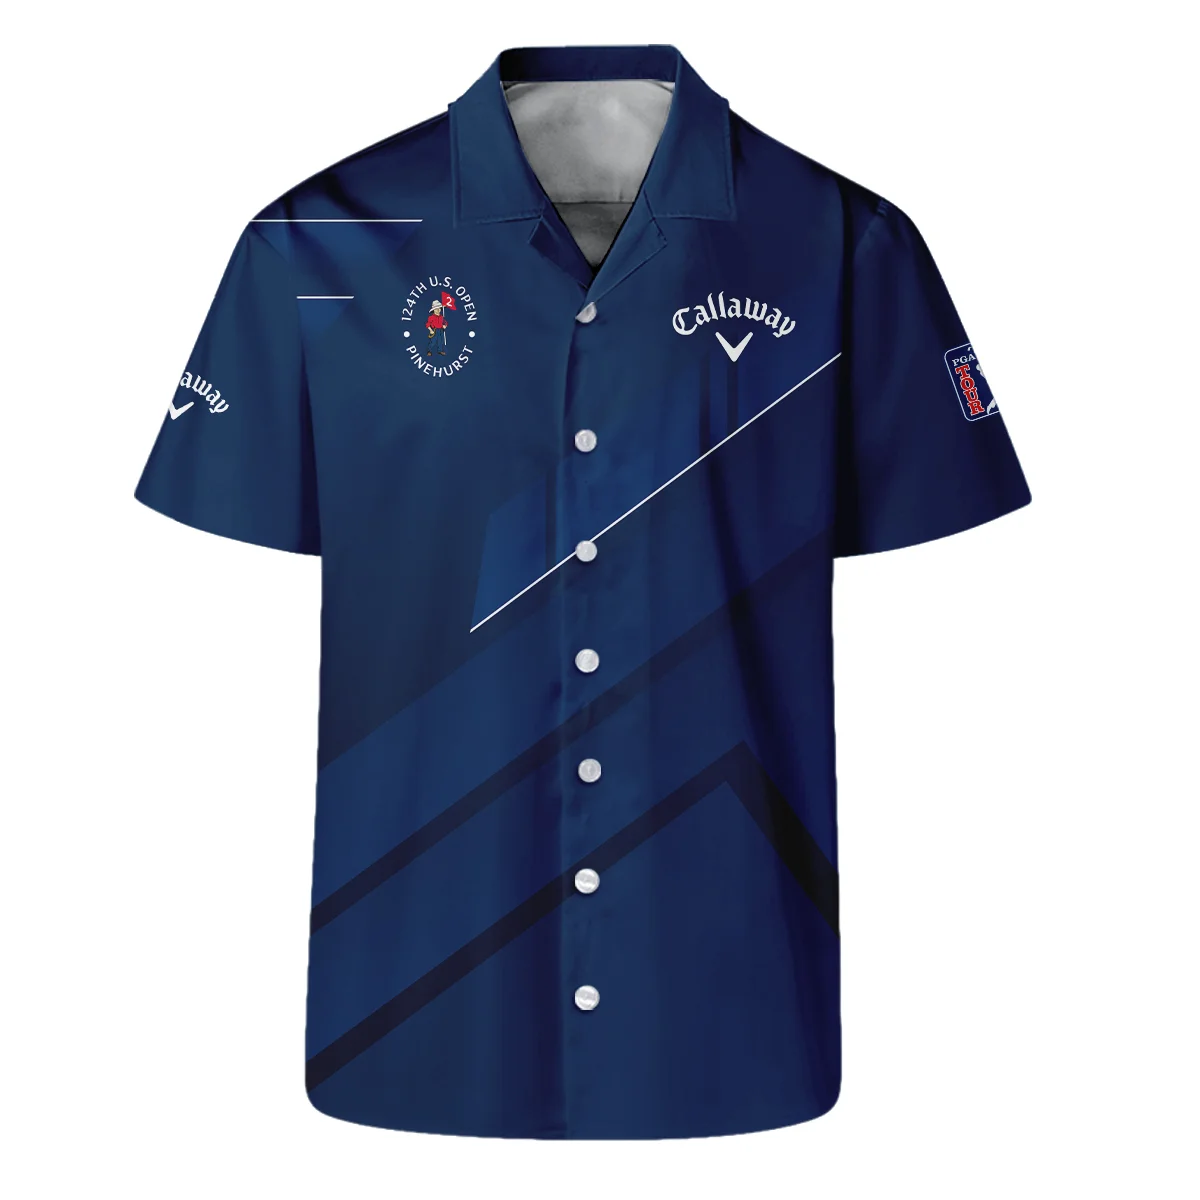 Callaway 124th U.S. Open Pinehurst Blue Gradient With White Straight Line Polo Shirt Style Classic Polo Shirt For Men